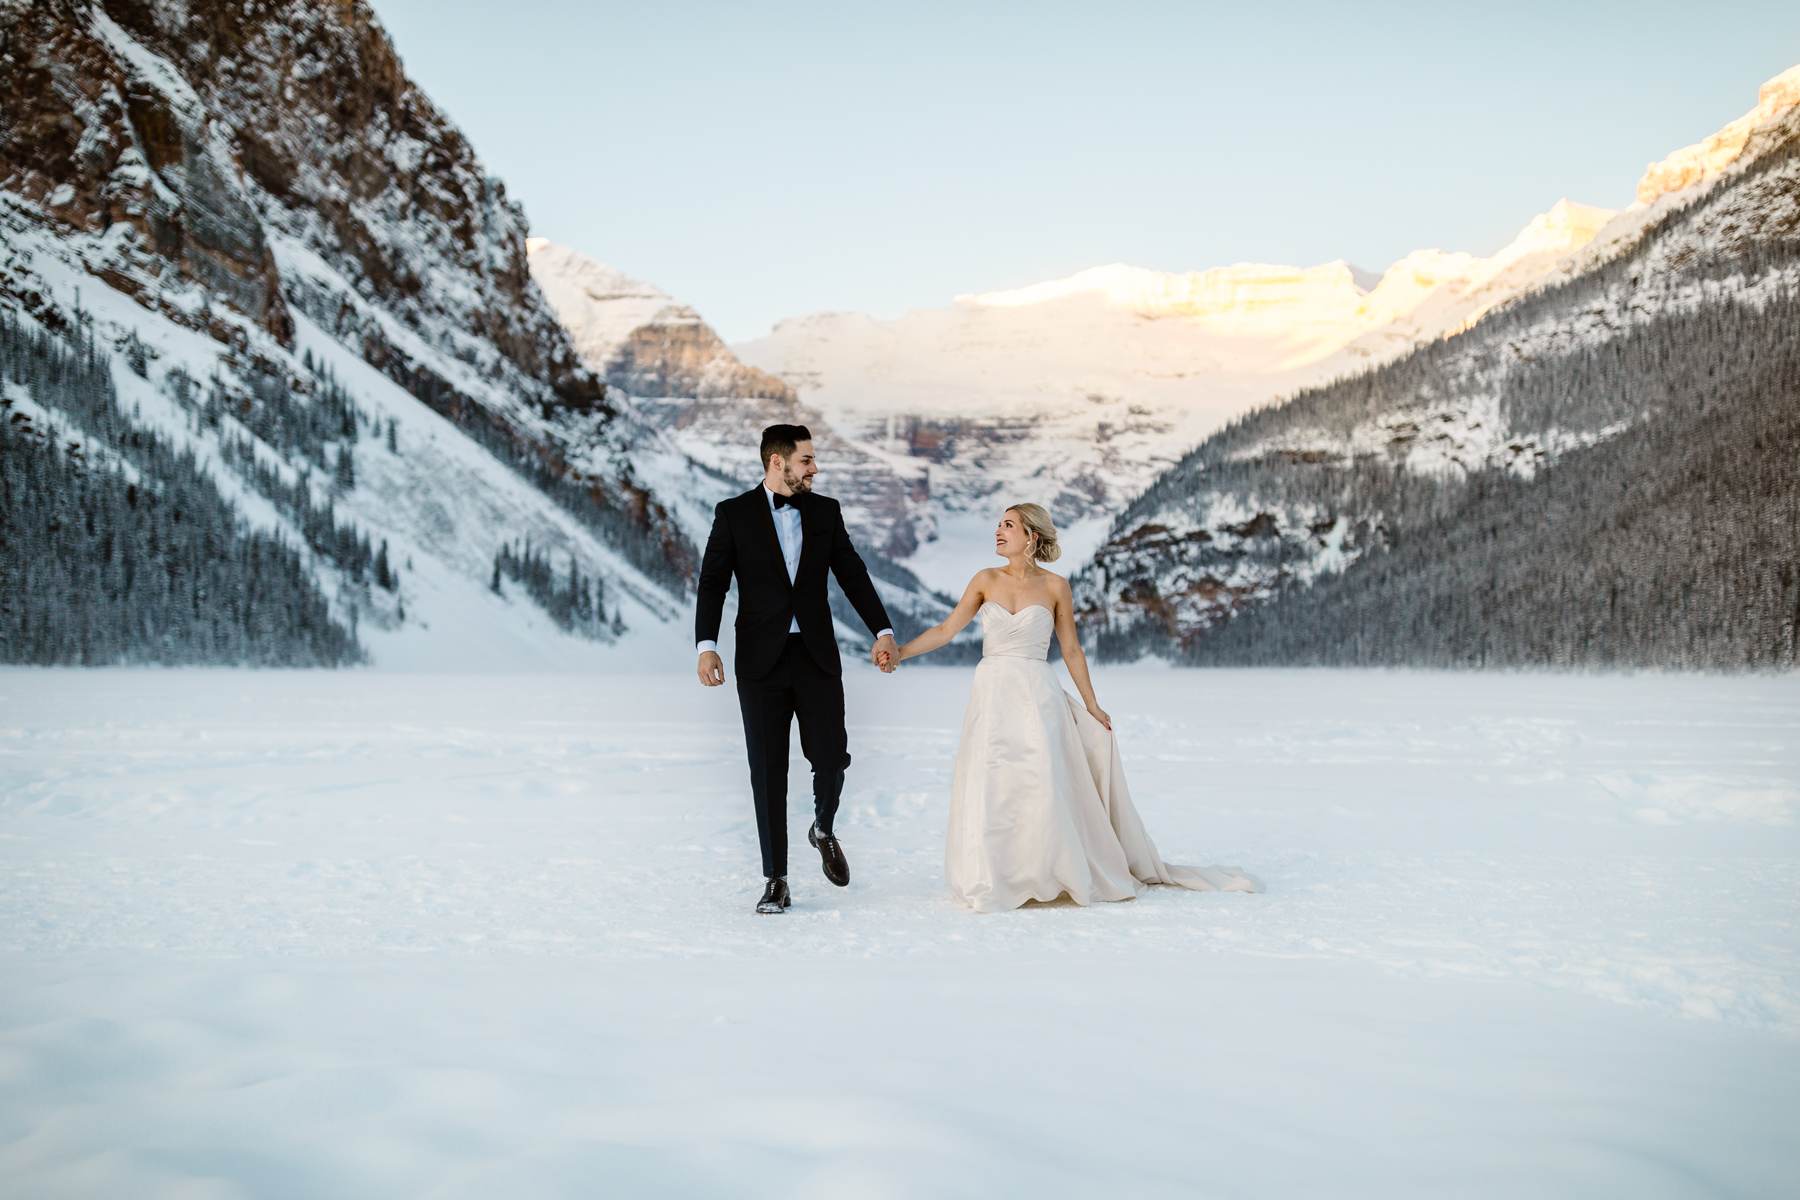 Fairmont Chateau Lake Louise Wedding Photography in Winter - Image 32